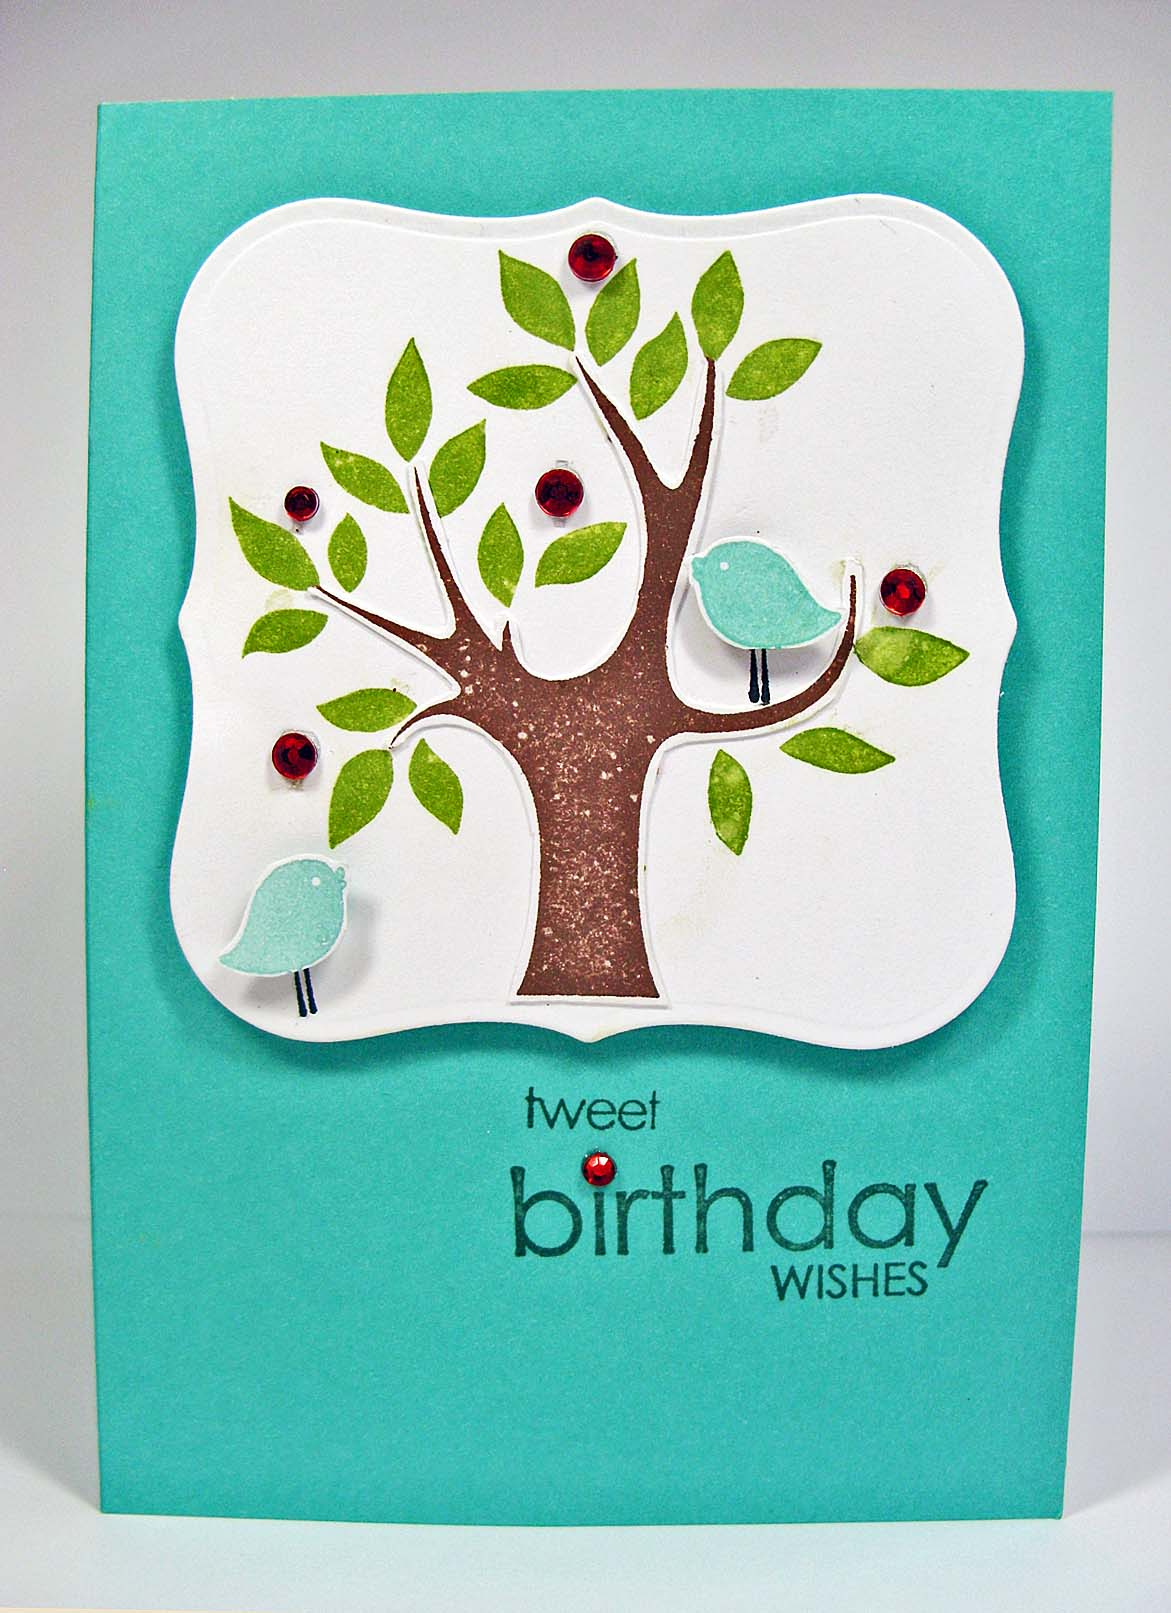 Cute Birthday Card Ideas For Mom 10 Graceful And Attractive Birthday Cards To Send Your Wish To Your